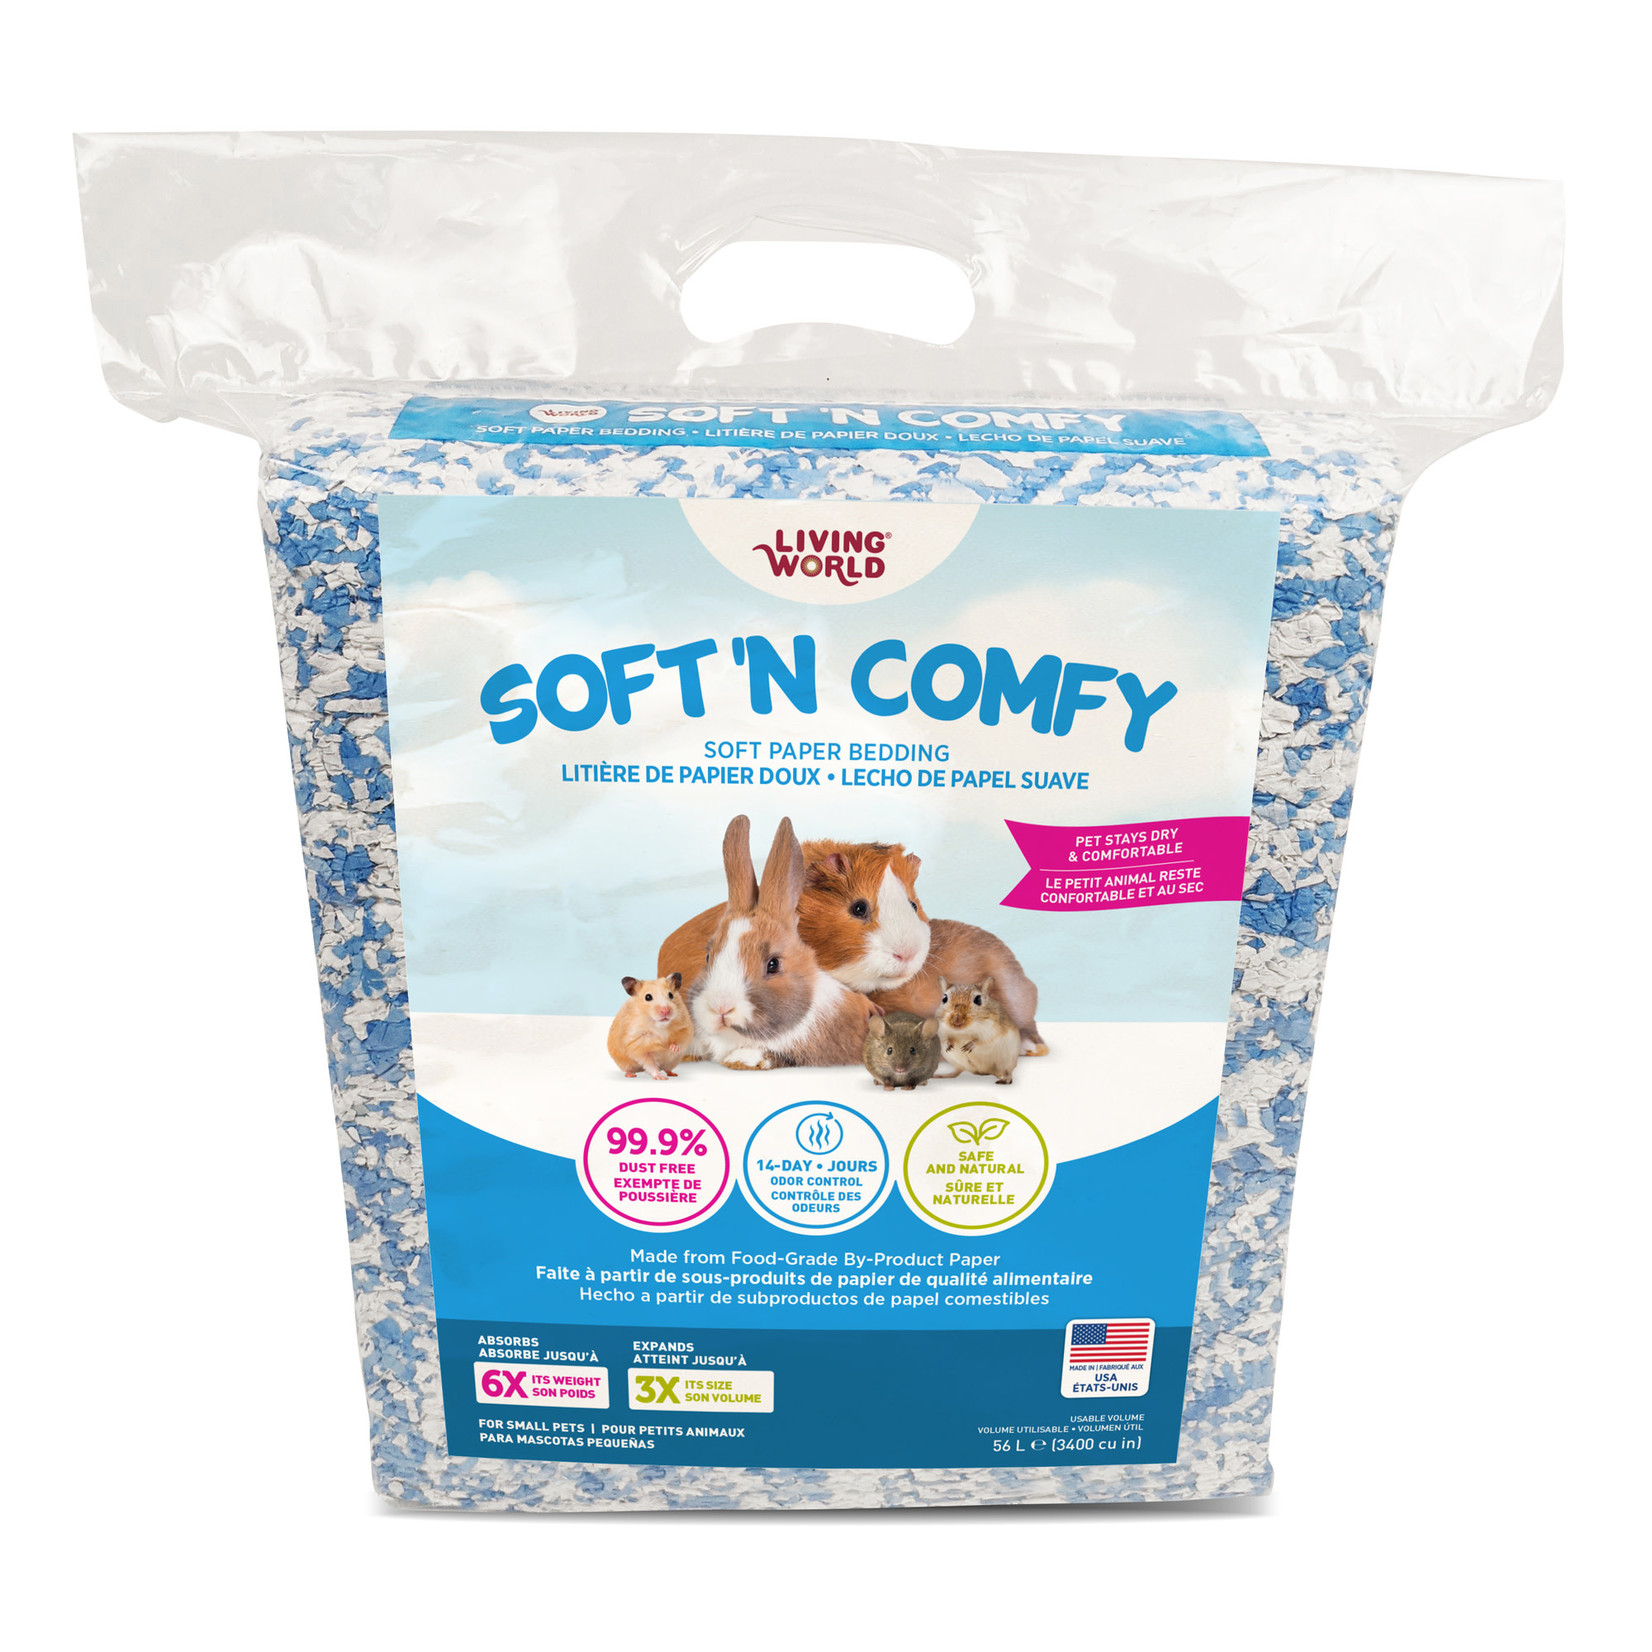 LIVING WORLD Living World Soft 'N Comfy Small Animal Paper Bedding - Bi-Colour - 56 L (3400 cu in)